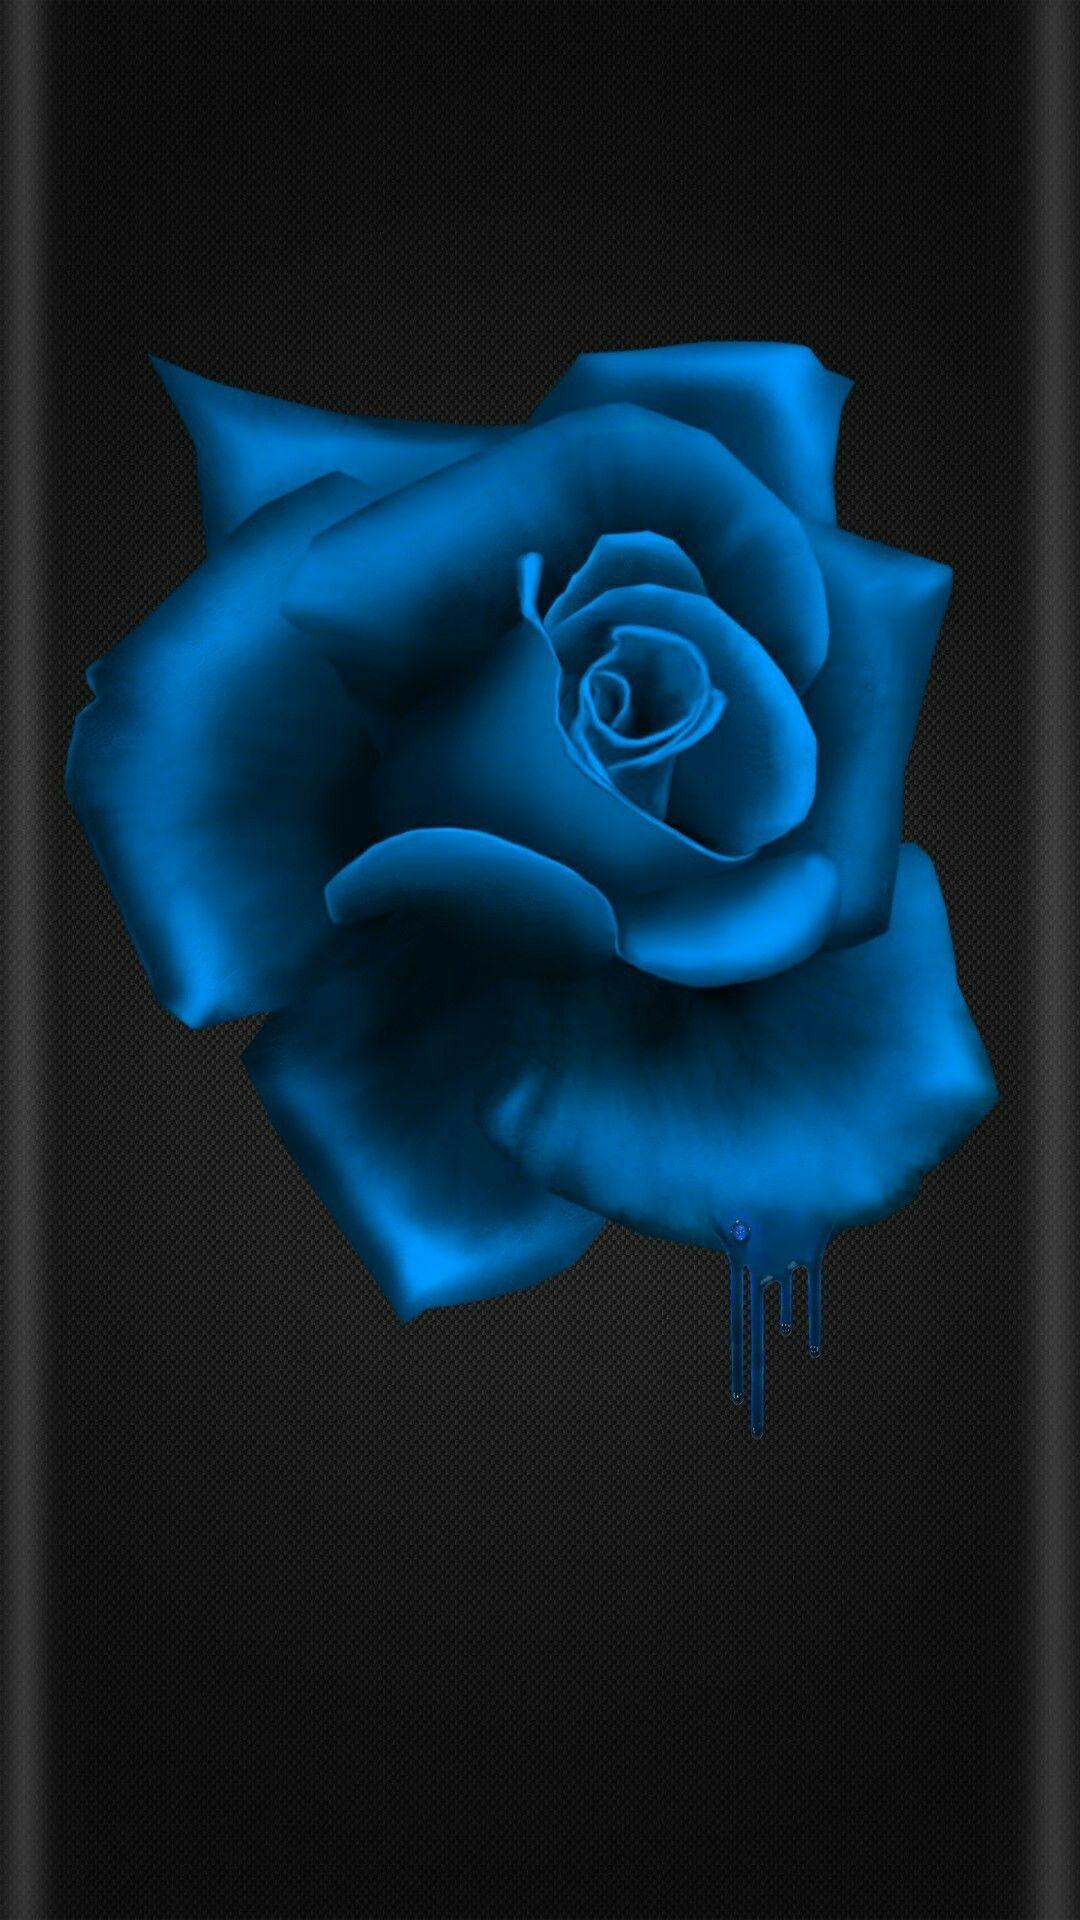 150 Best Blue Rose Wallpaper Images and Photos  For a Perfect Romantic  Bond  Blue roses wallpaper Red roses wallpaper Rose wallpaper